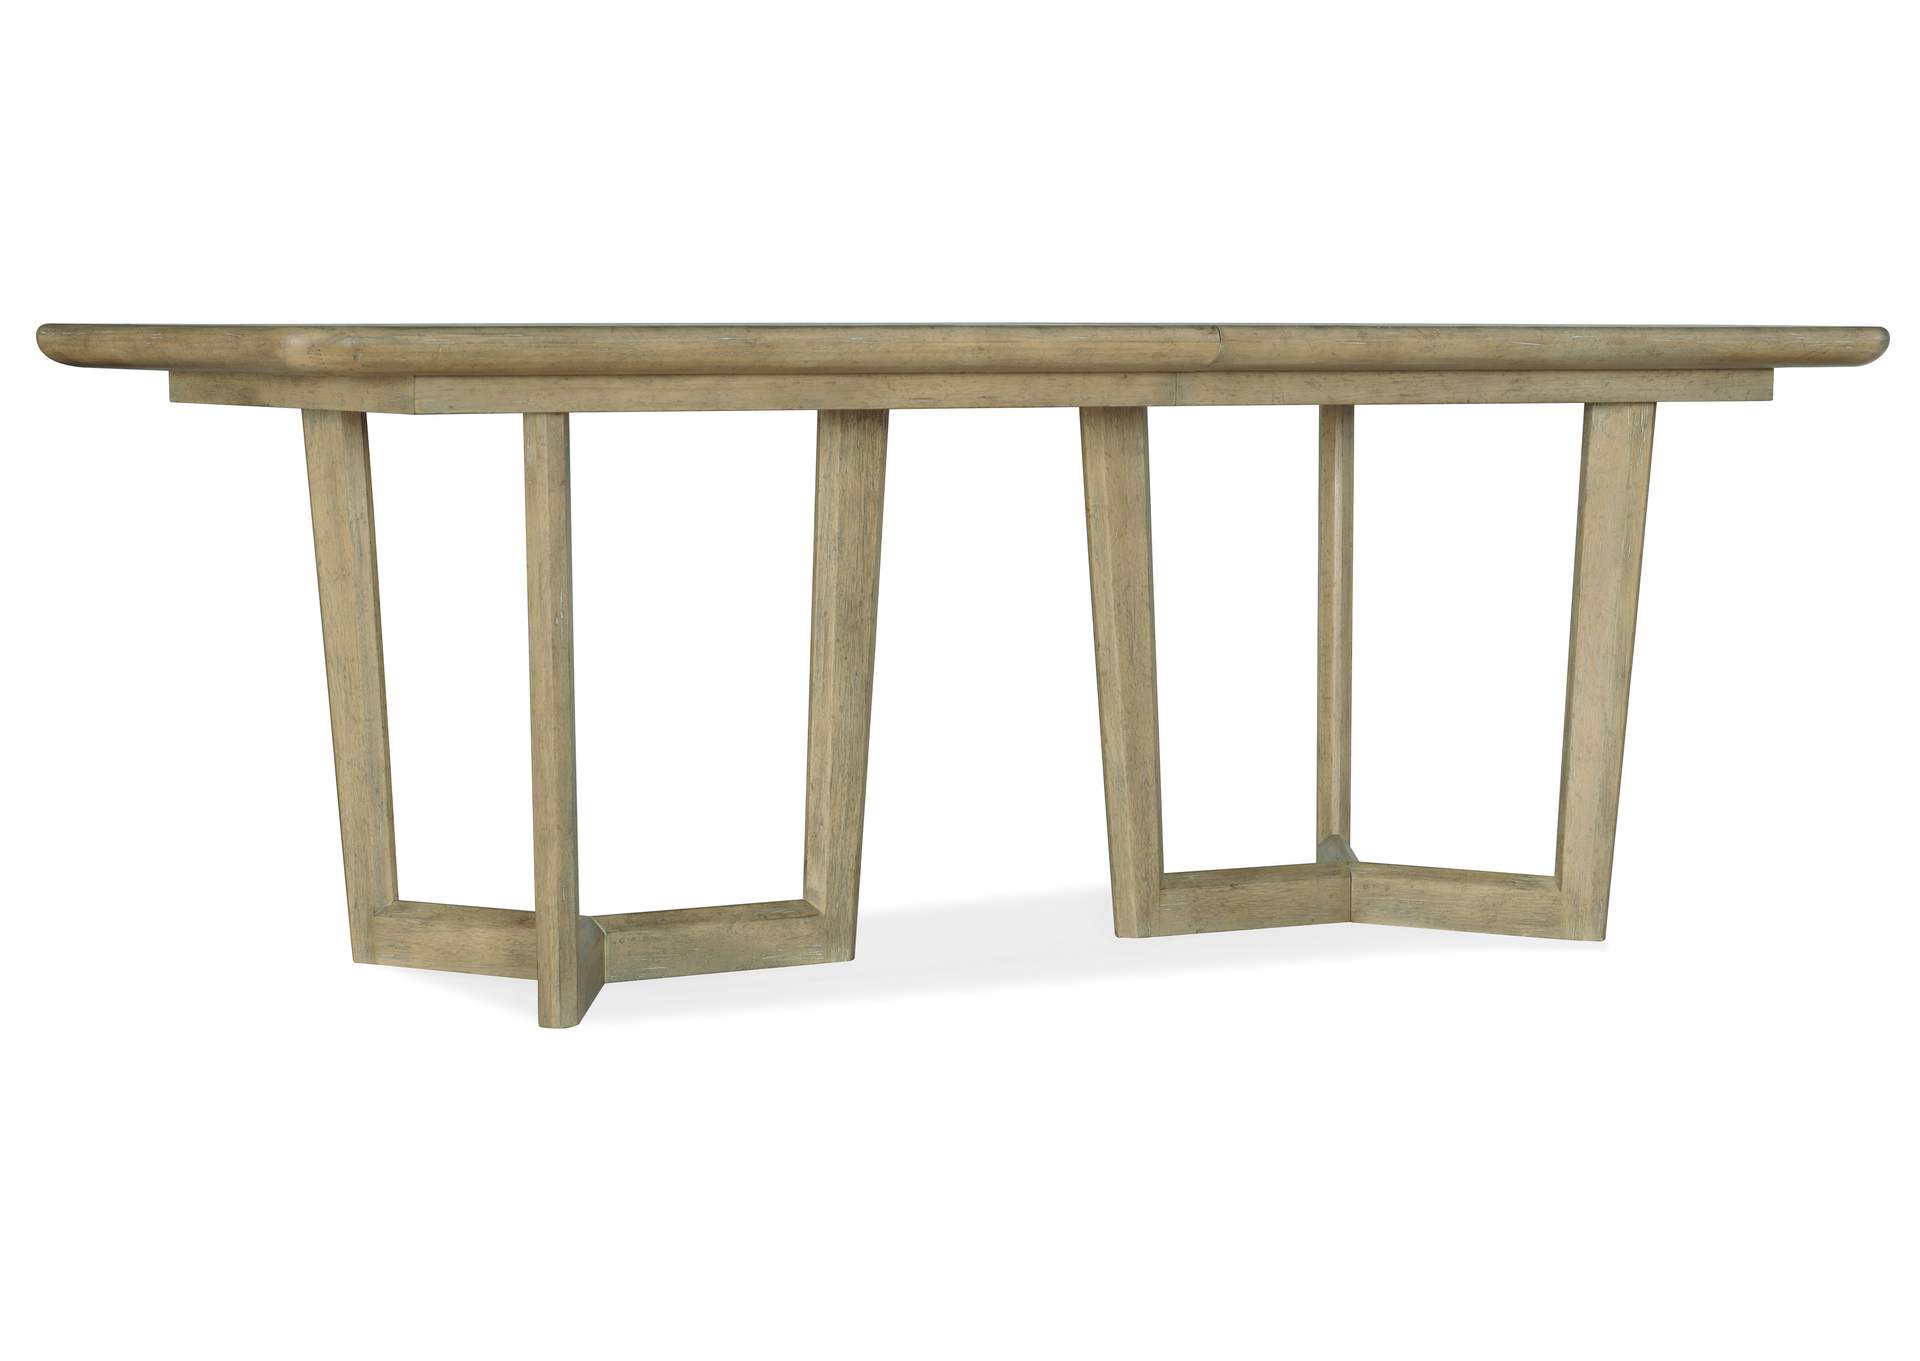 Surfrider Rectangle Dining Table W - 2 - 18In Leaves,Hooker Furniture